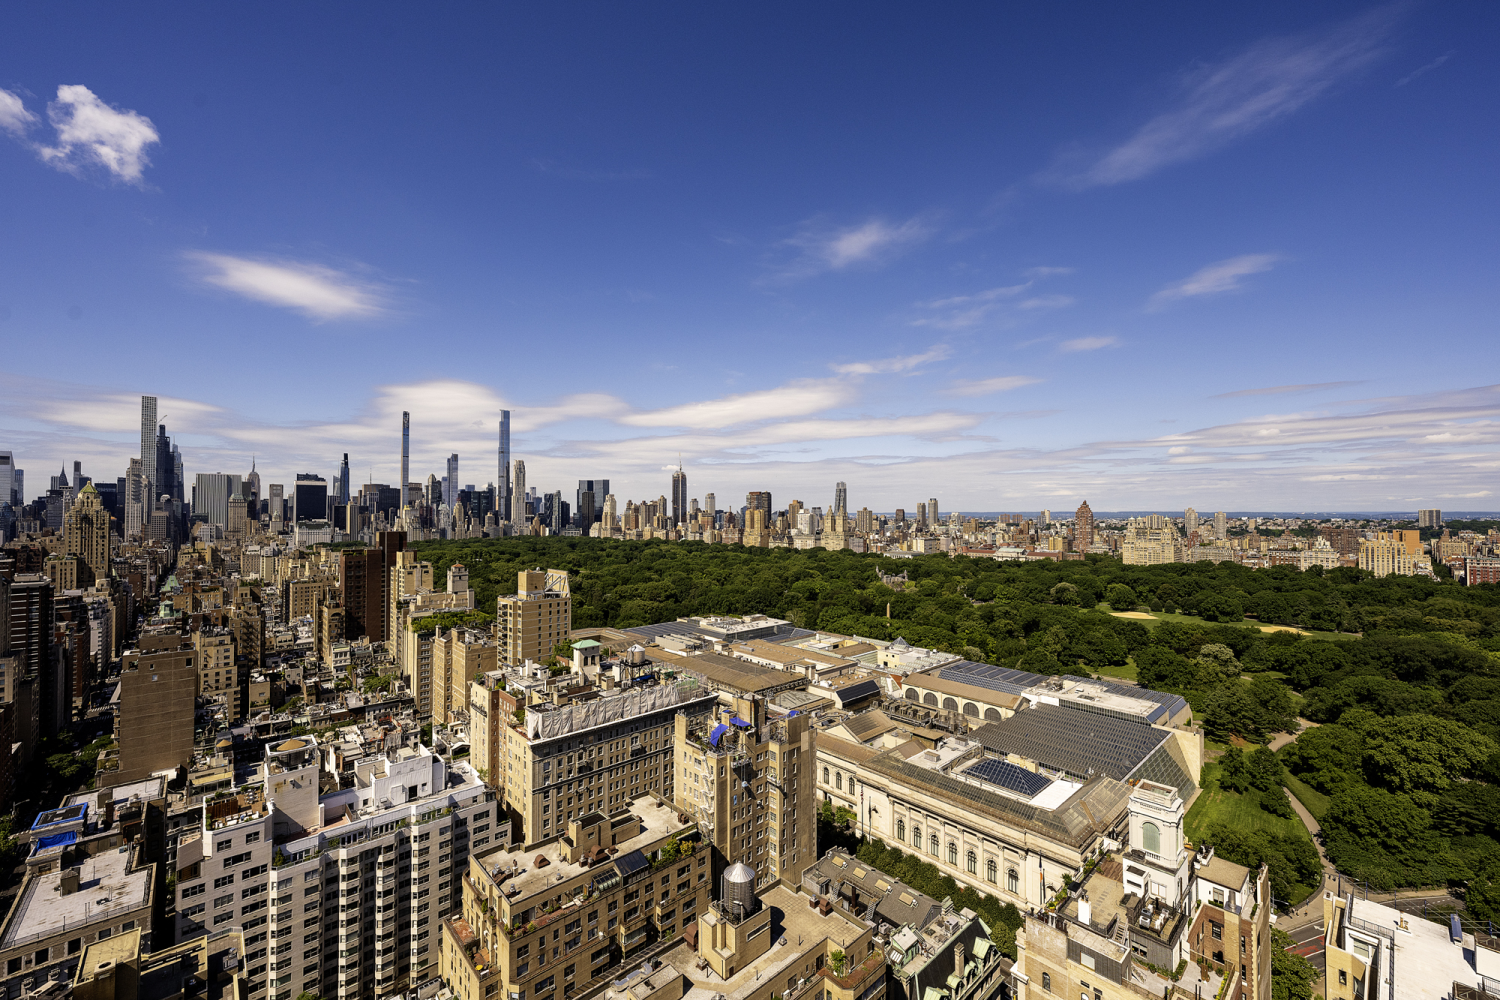 30 East 85th Street Penthouse, Upper East Side, Upper East Side, NYC - 5 Bedrooms  
5 Bathrooms  
10 Rooms - 